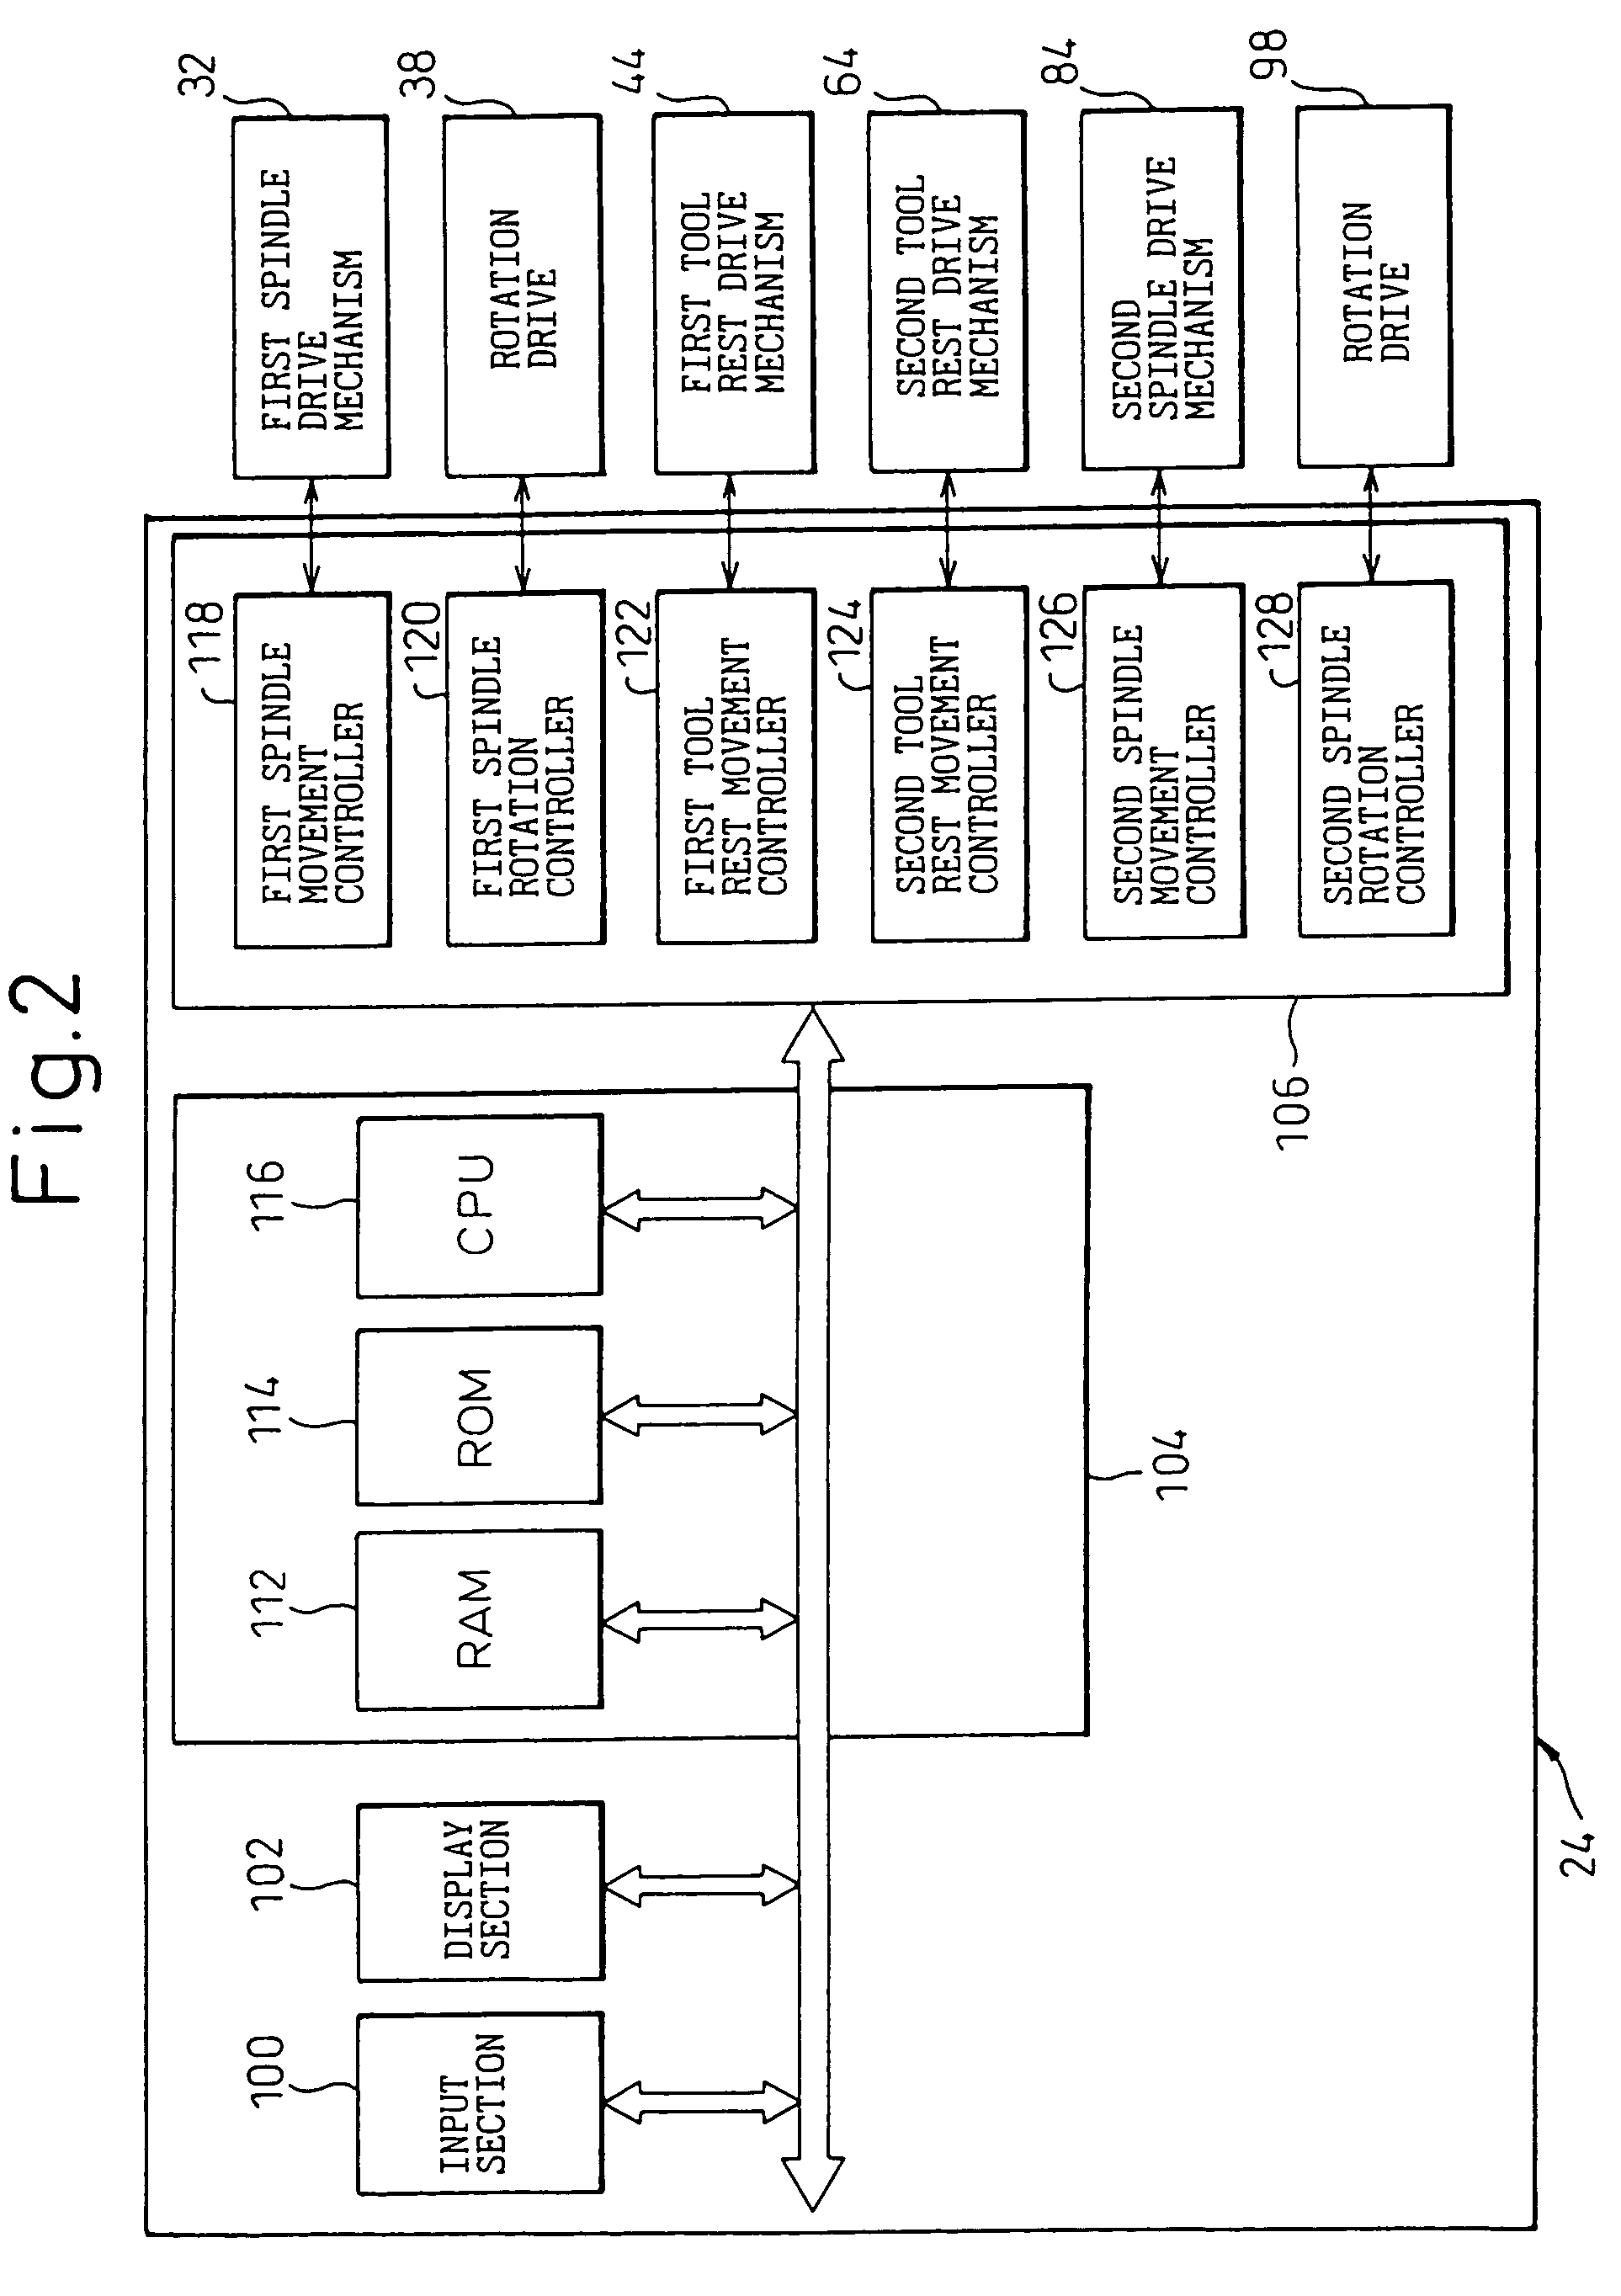 Numeric control lathe and method for controlling the same